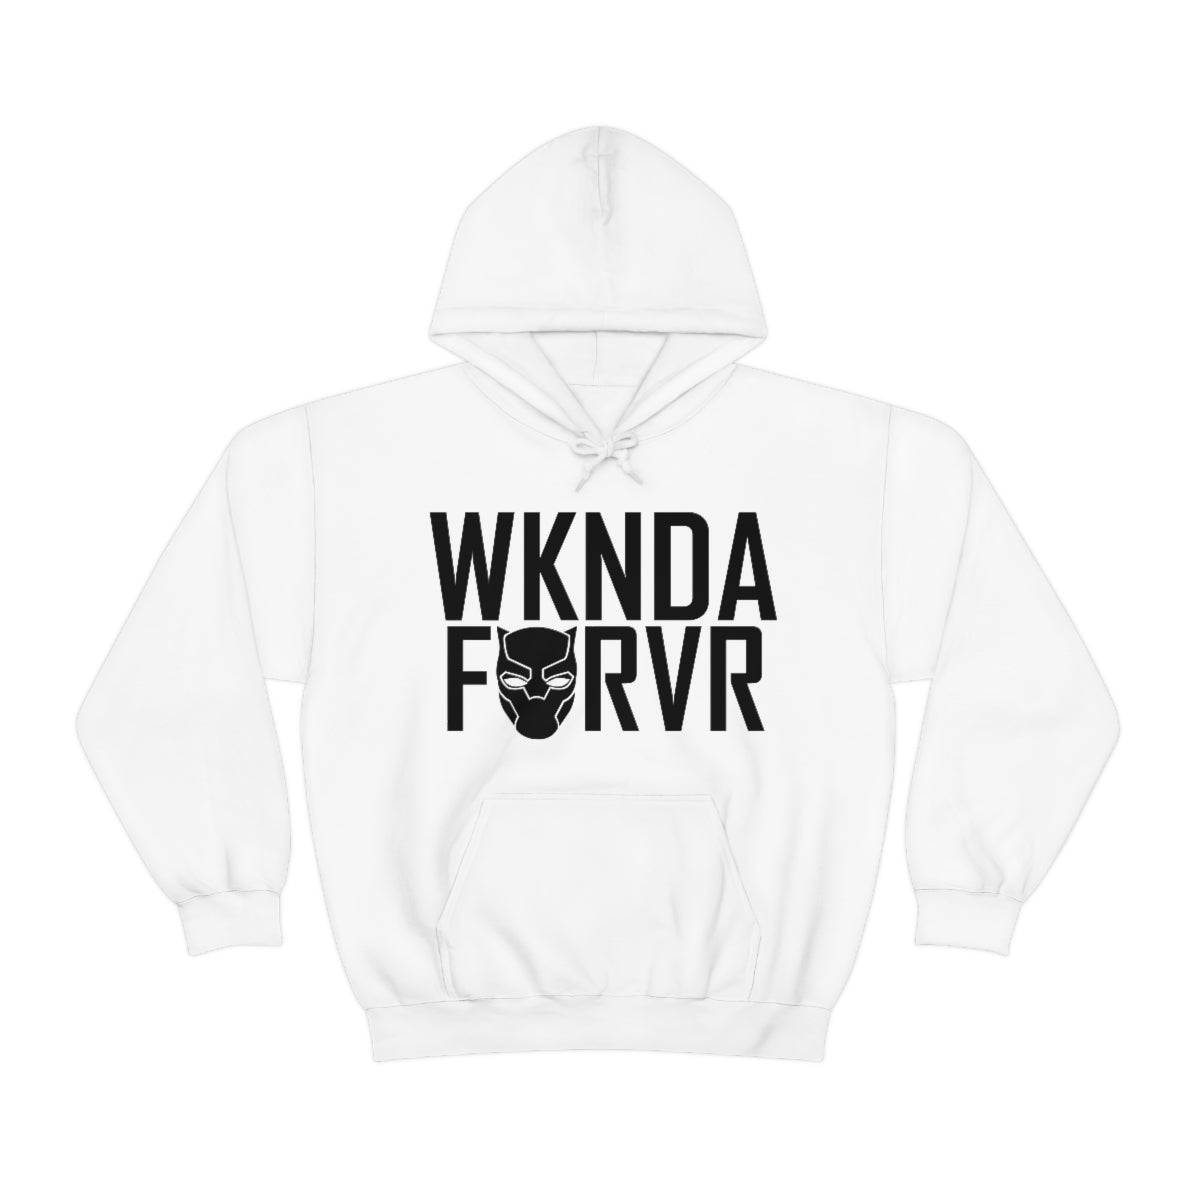 "WKNDA FRVR" Hoodie (Available in White & Gray)